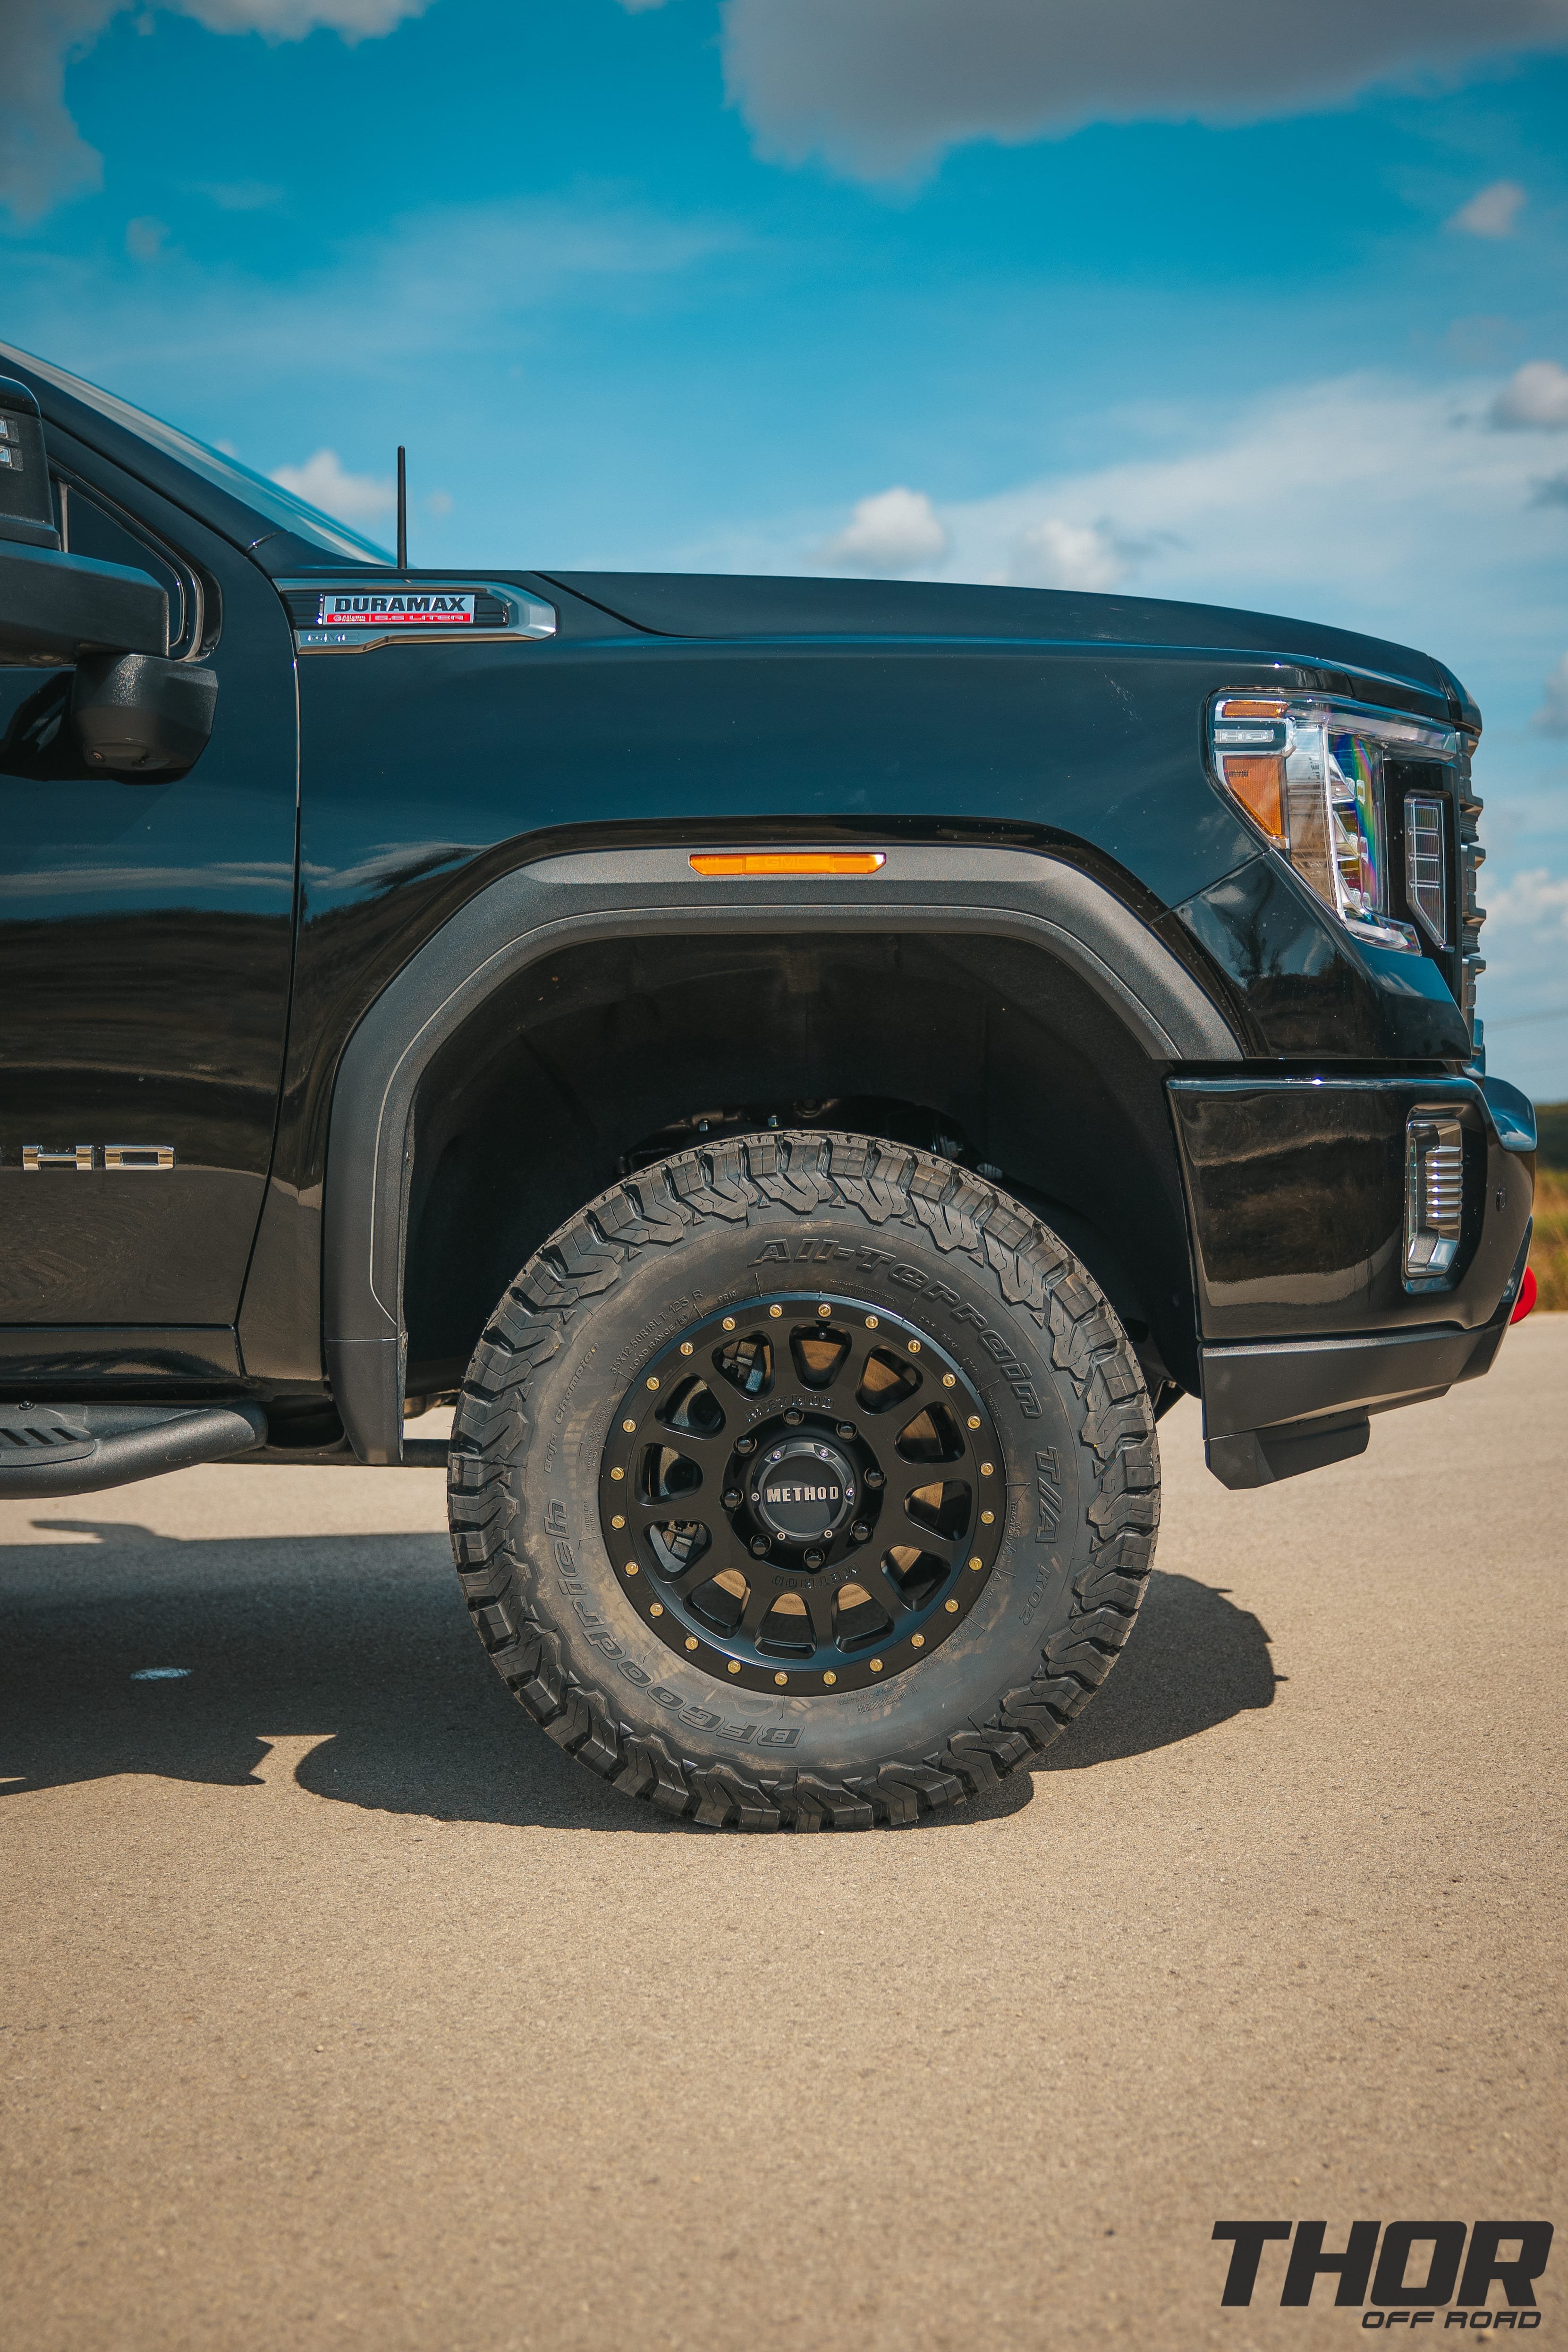 2022 GMC Sierra 2500 HD AT4 in Onyx Black with 3" Cognito Performance Suspension Kit, 18" Method 305 NV Wheels, 35x12.50R18 BFG KO2 Tires, ReadyLift Air Bag Kit